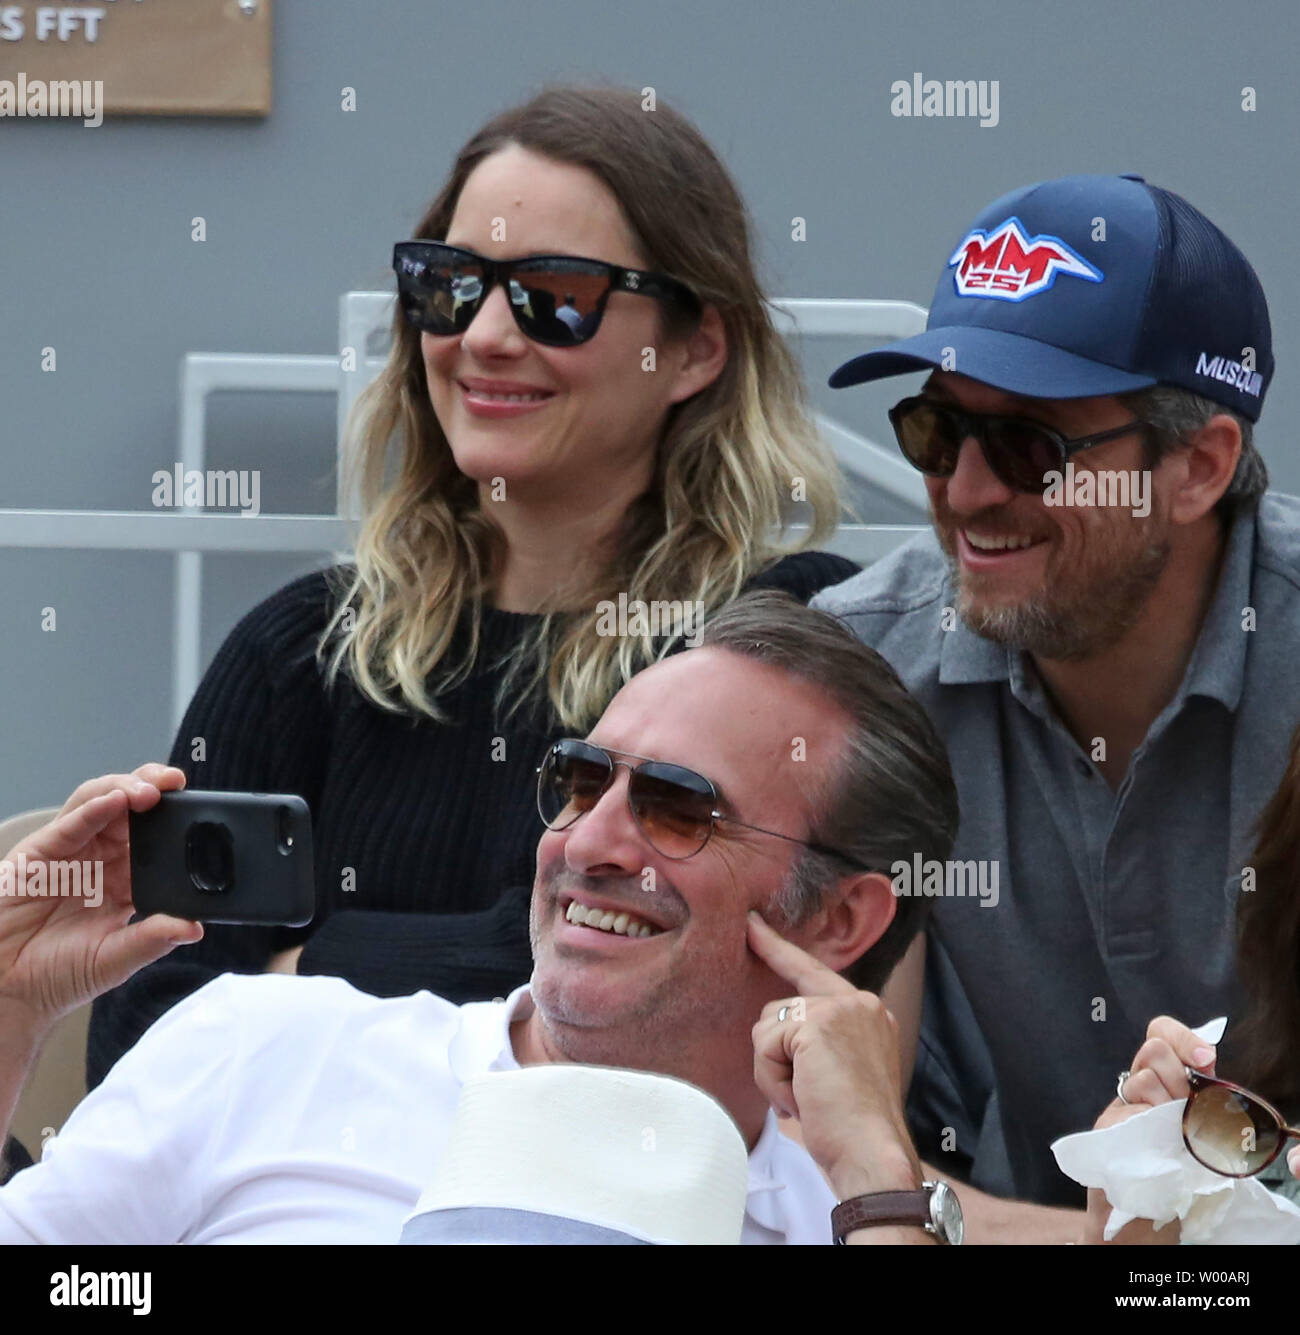 Marion Cotillard (L), Jean Dujardin (C) and Guillaume Canet watch the  French Open men's final match between Rafael Nadal of Spain and Dominic  Thiem of Austria at Roland Garros in Paris on